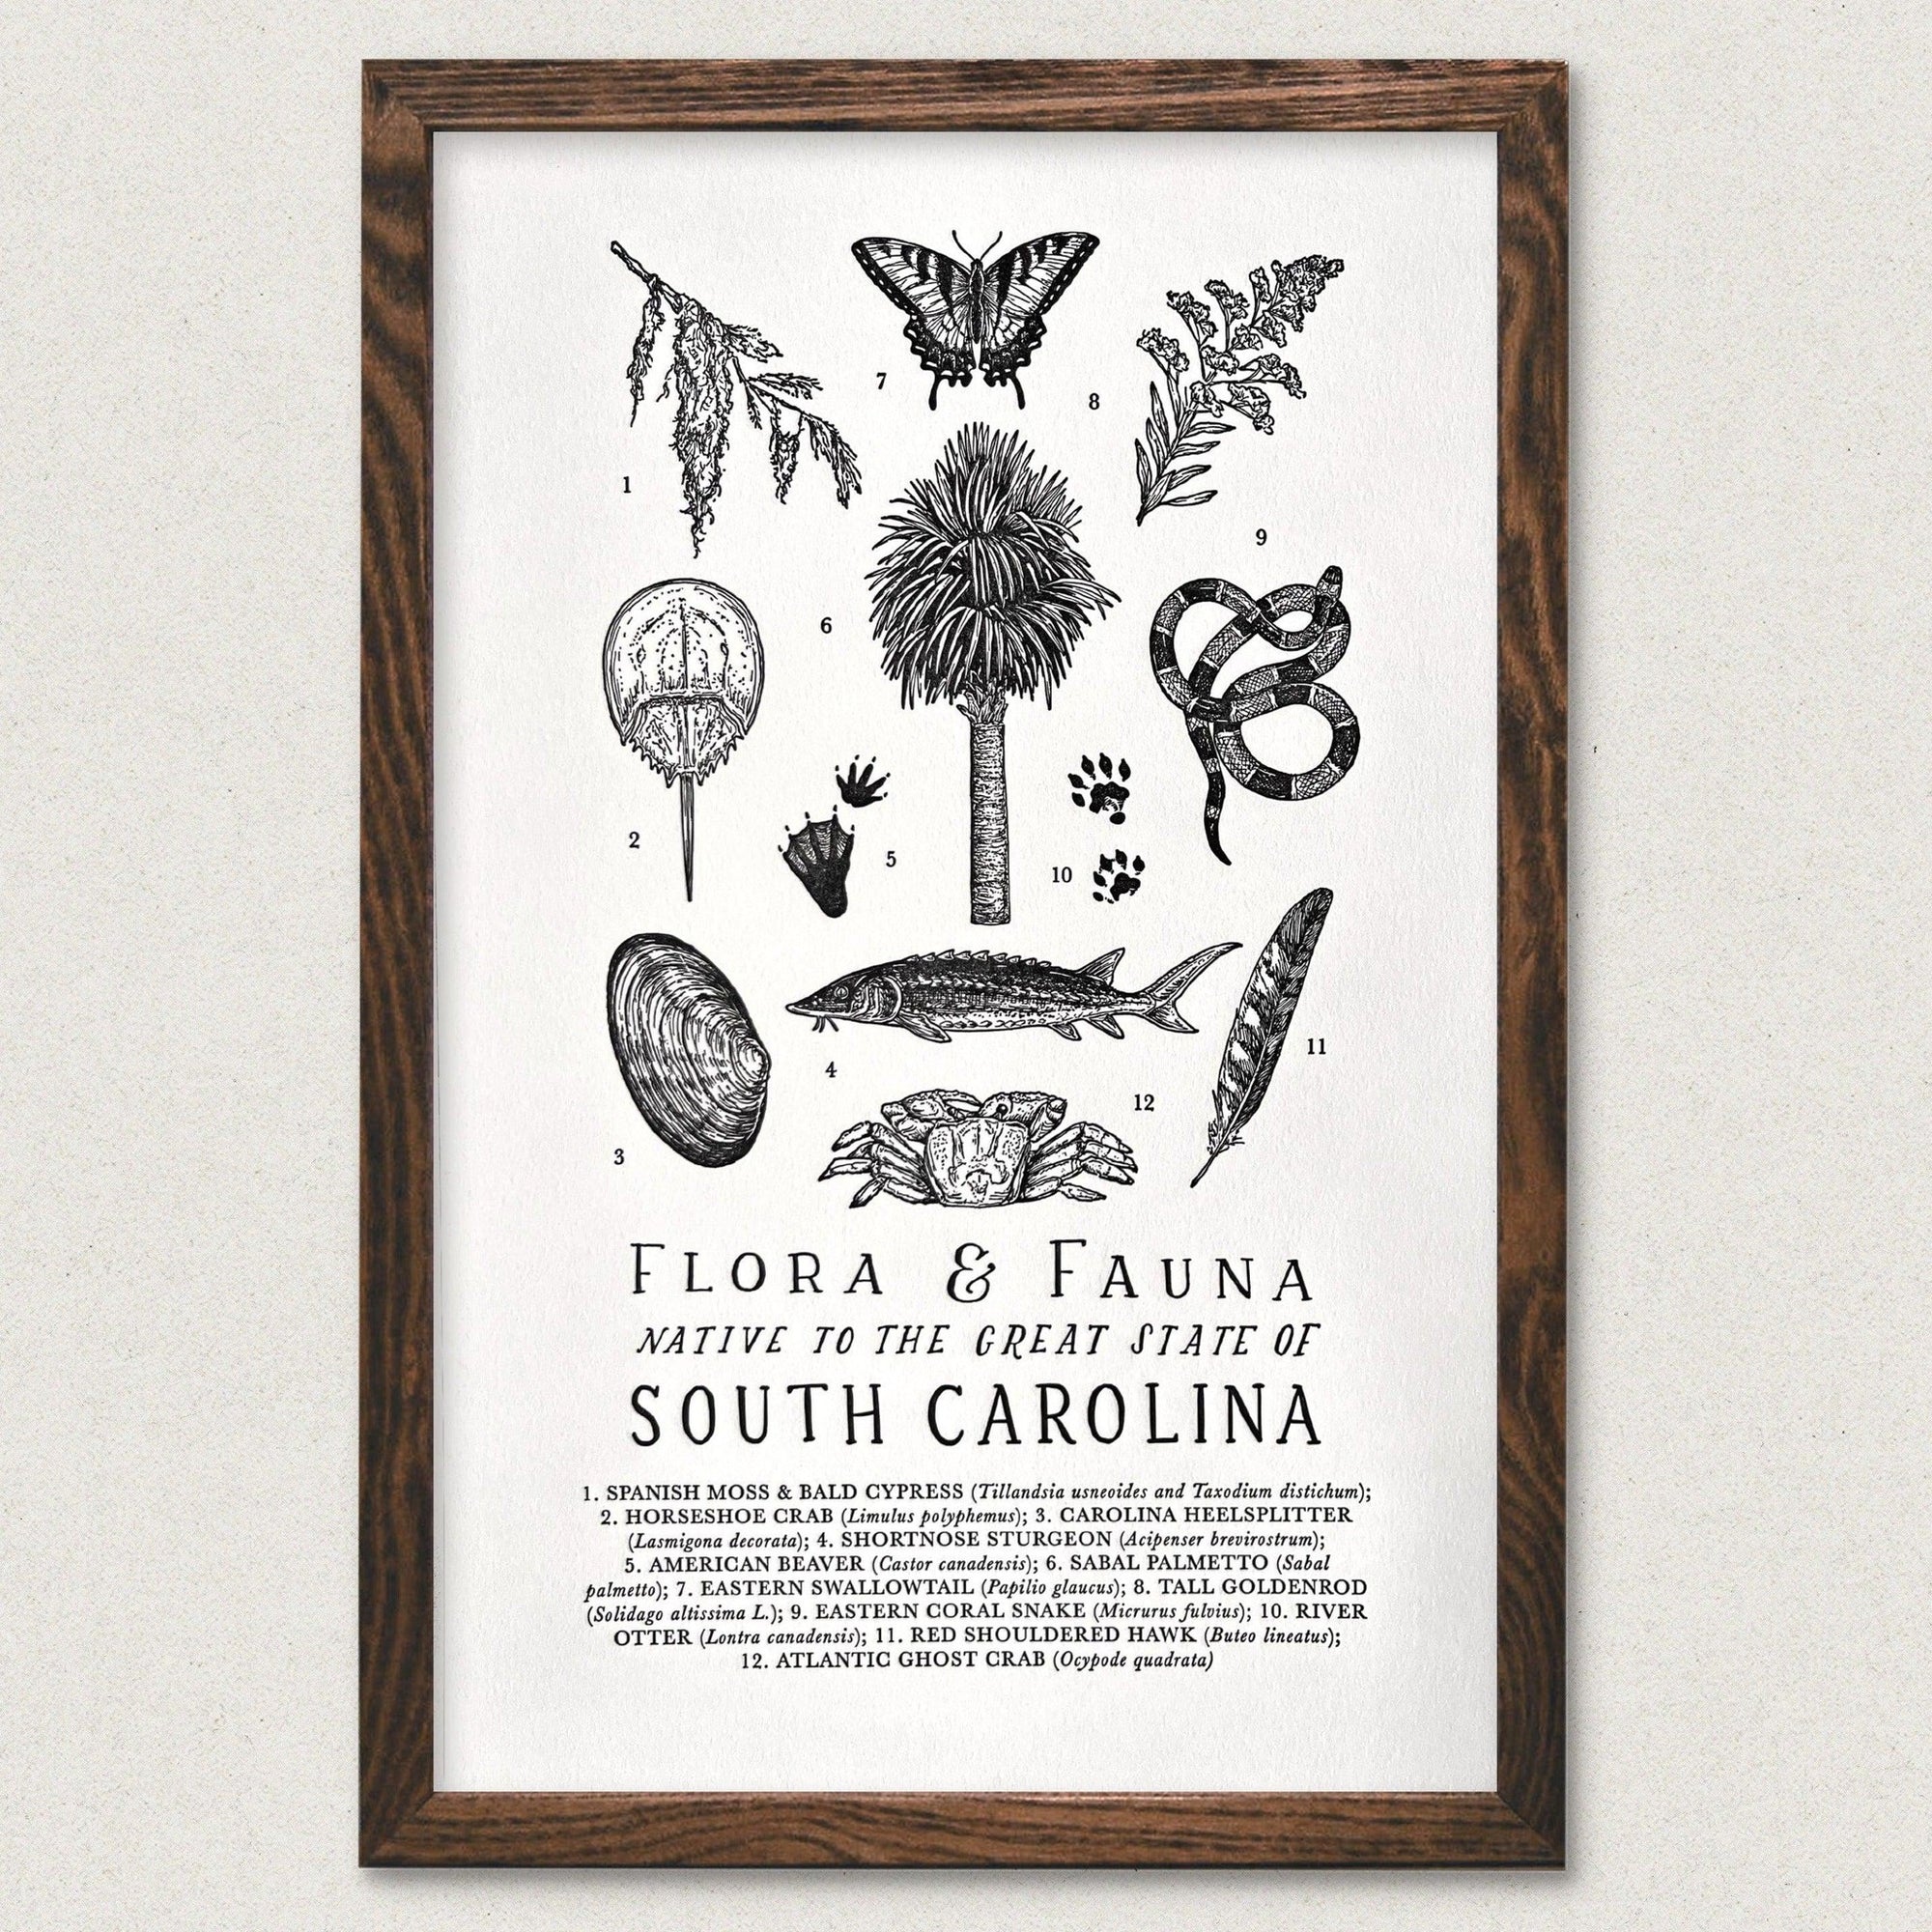 A South Carolina Field Guide Letterpress Print featuring flora & fauna from the region by The Wild Wander.